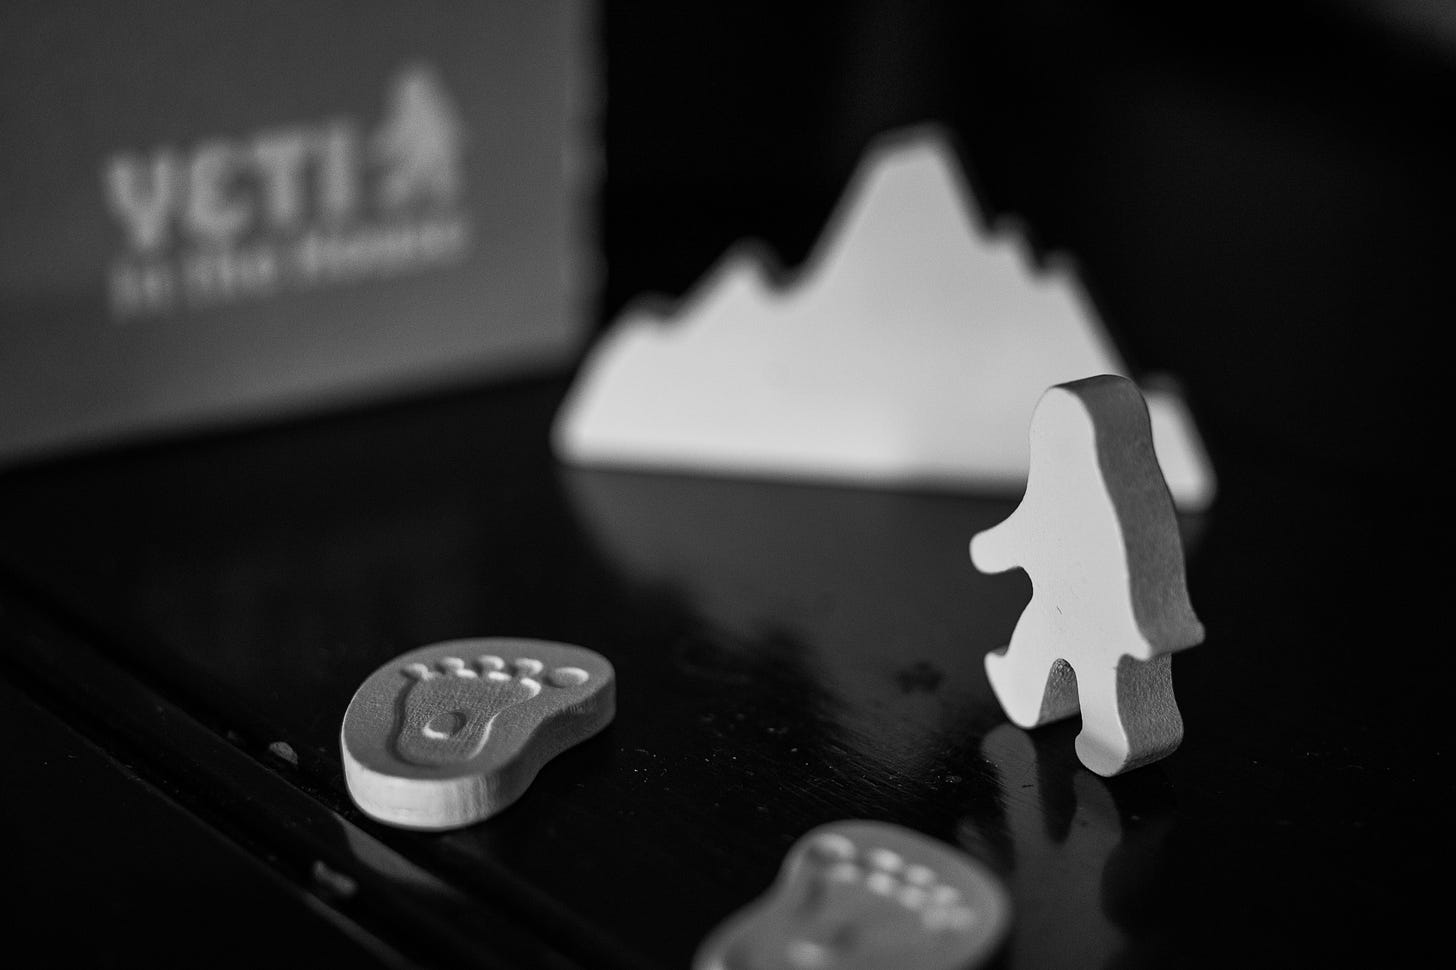 The board game Yeti in the House on a table. Components from the game are visible, including a yeti token, two footprint tokens, and a larger mountain token.